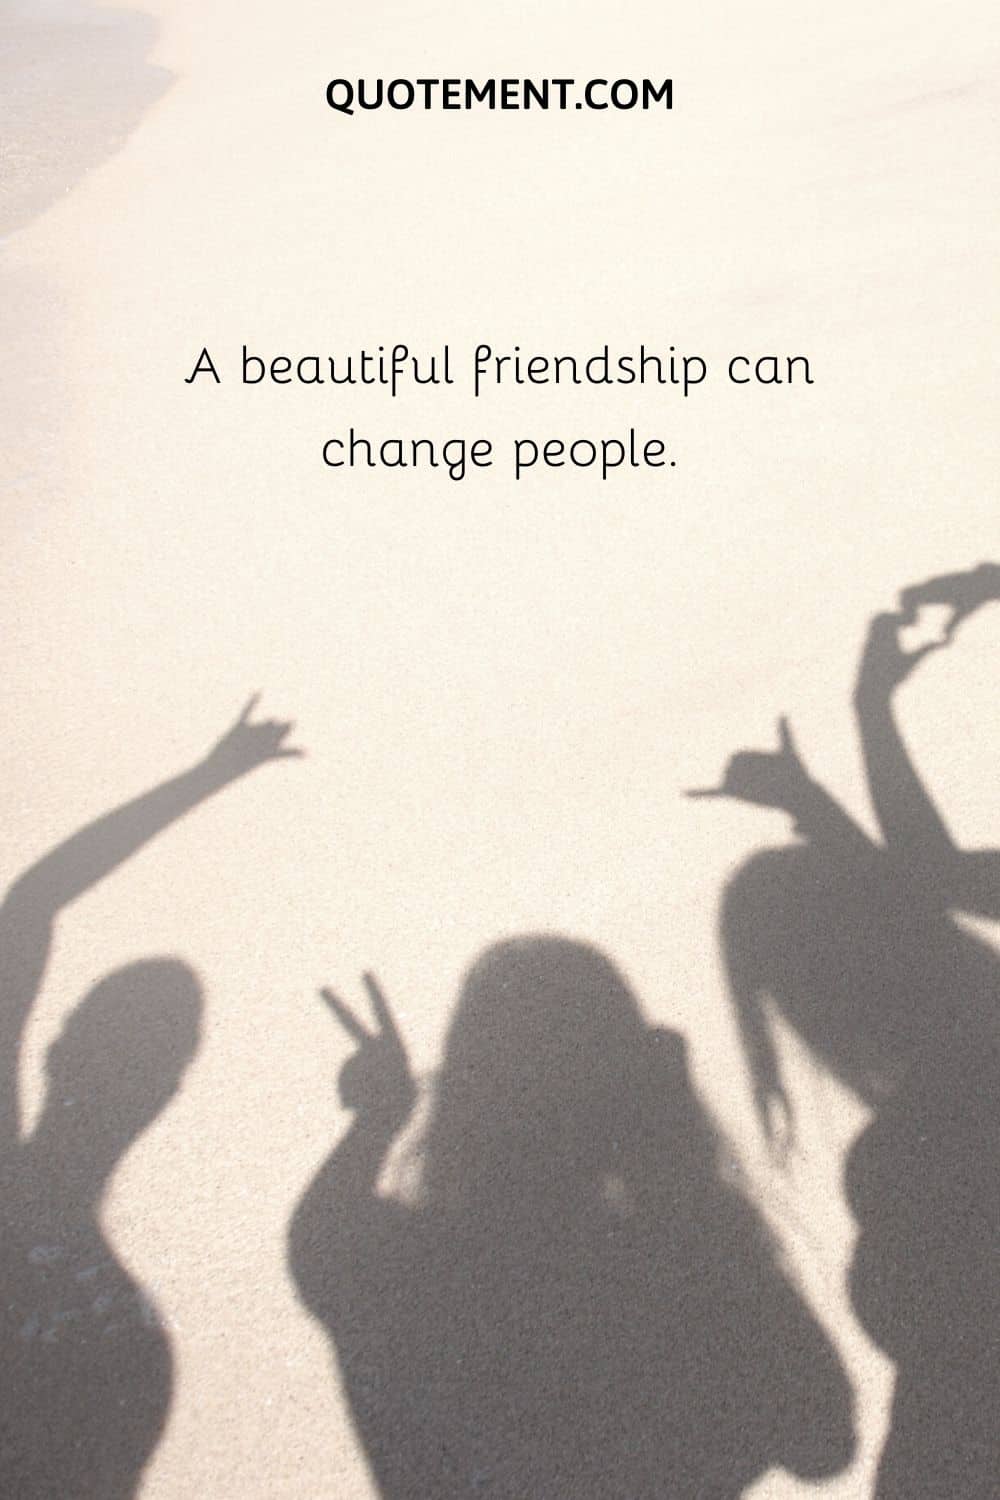 A beautiful friendship can change people